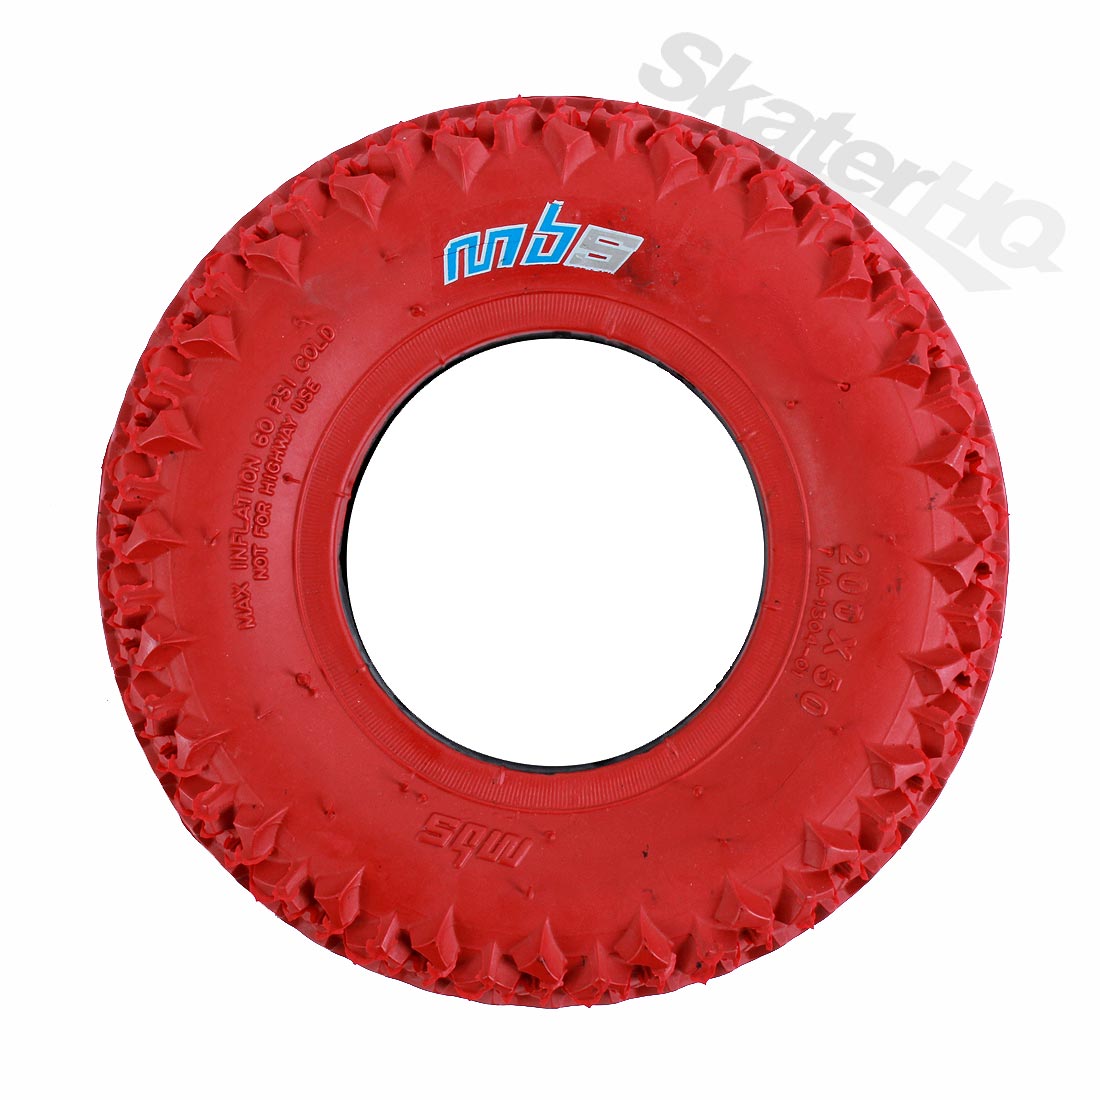 MBS T3 Tire Red - Single 200 x 50mm Skateboard Hardware and Parts